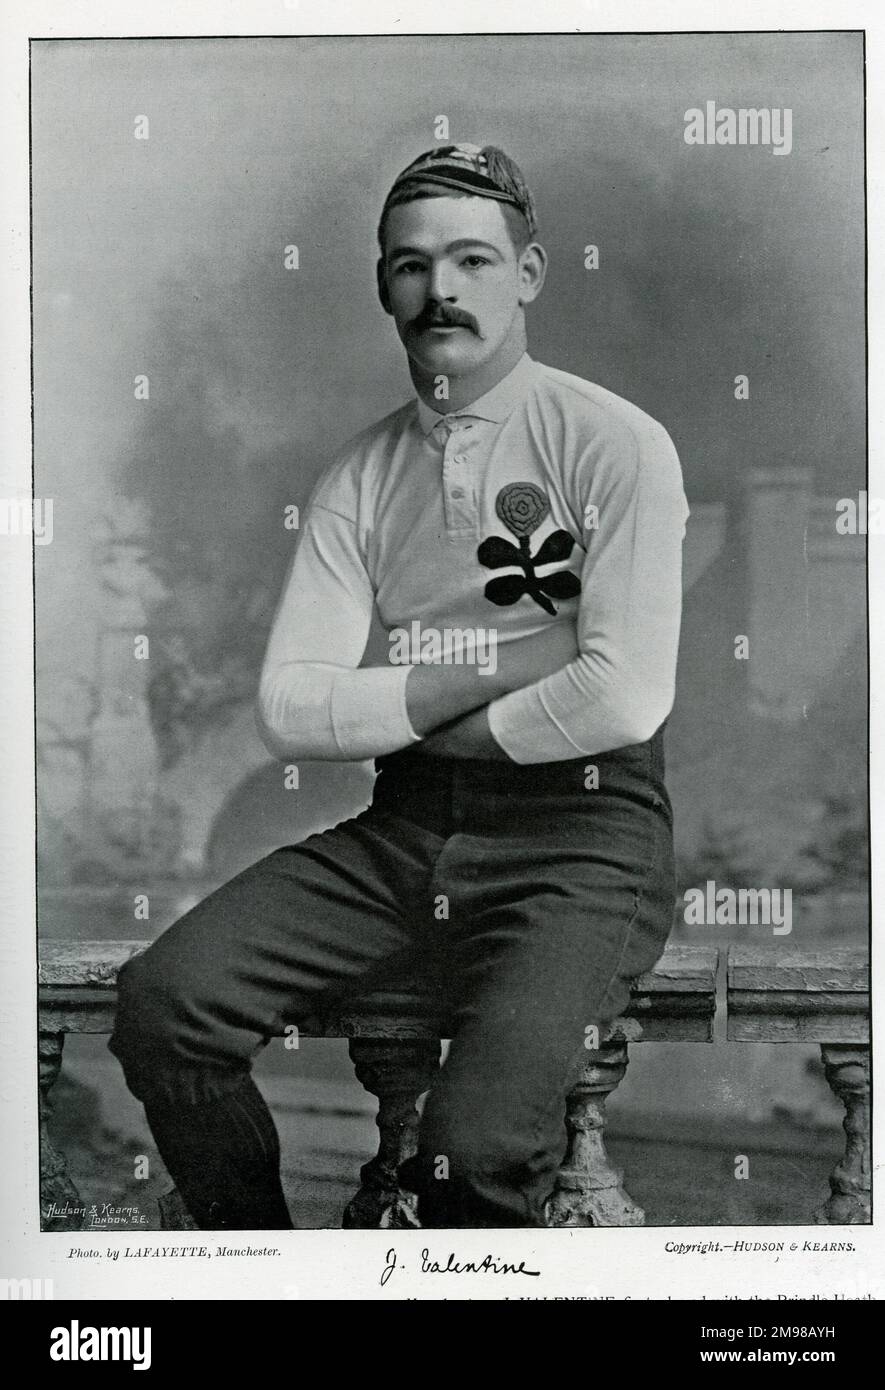 James 'Jim' Valentine (1866-1904), England rugby player who also played for Swinton and Lancashire. Stock Photo